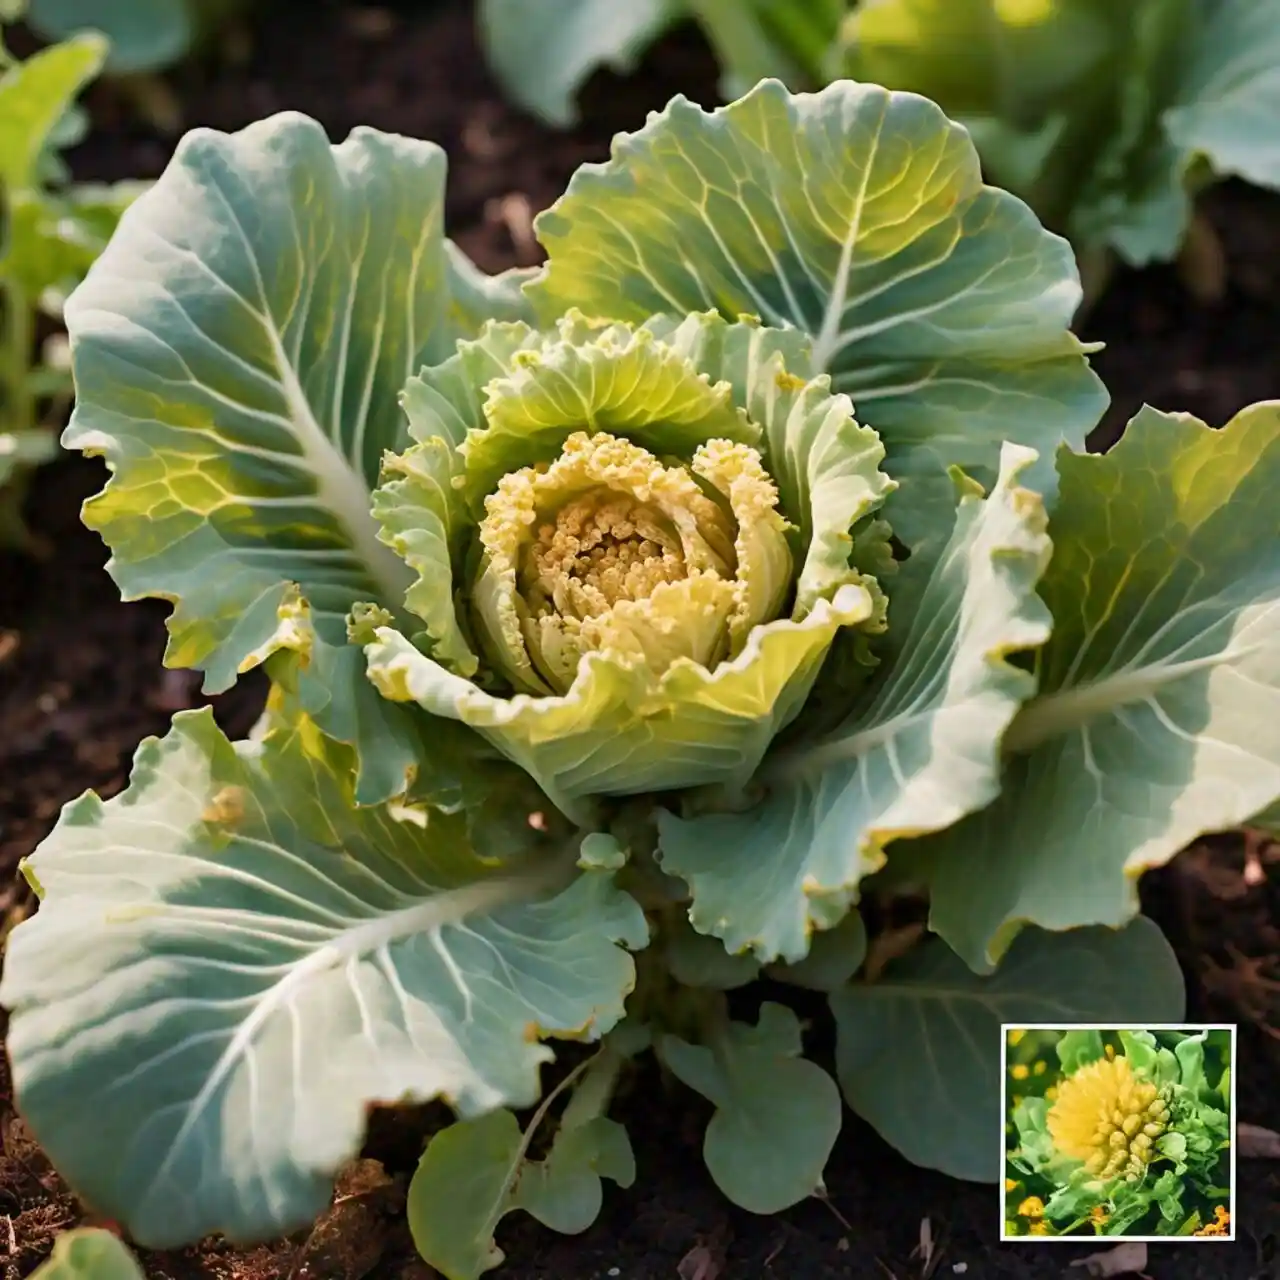 weed resembling cabbage growing in a garden bed